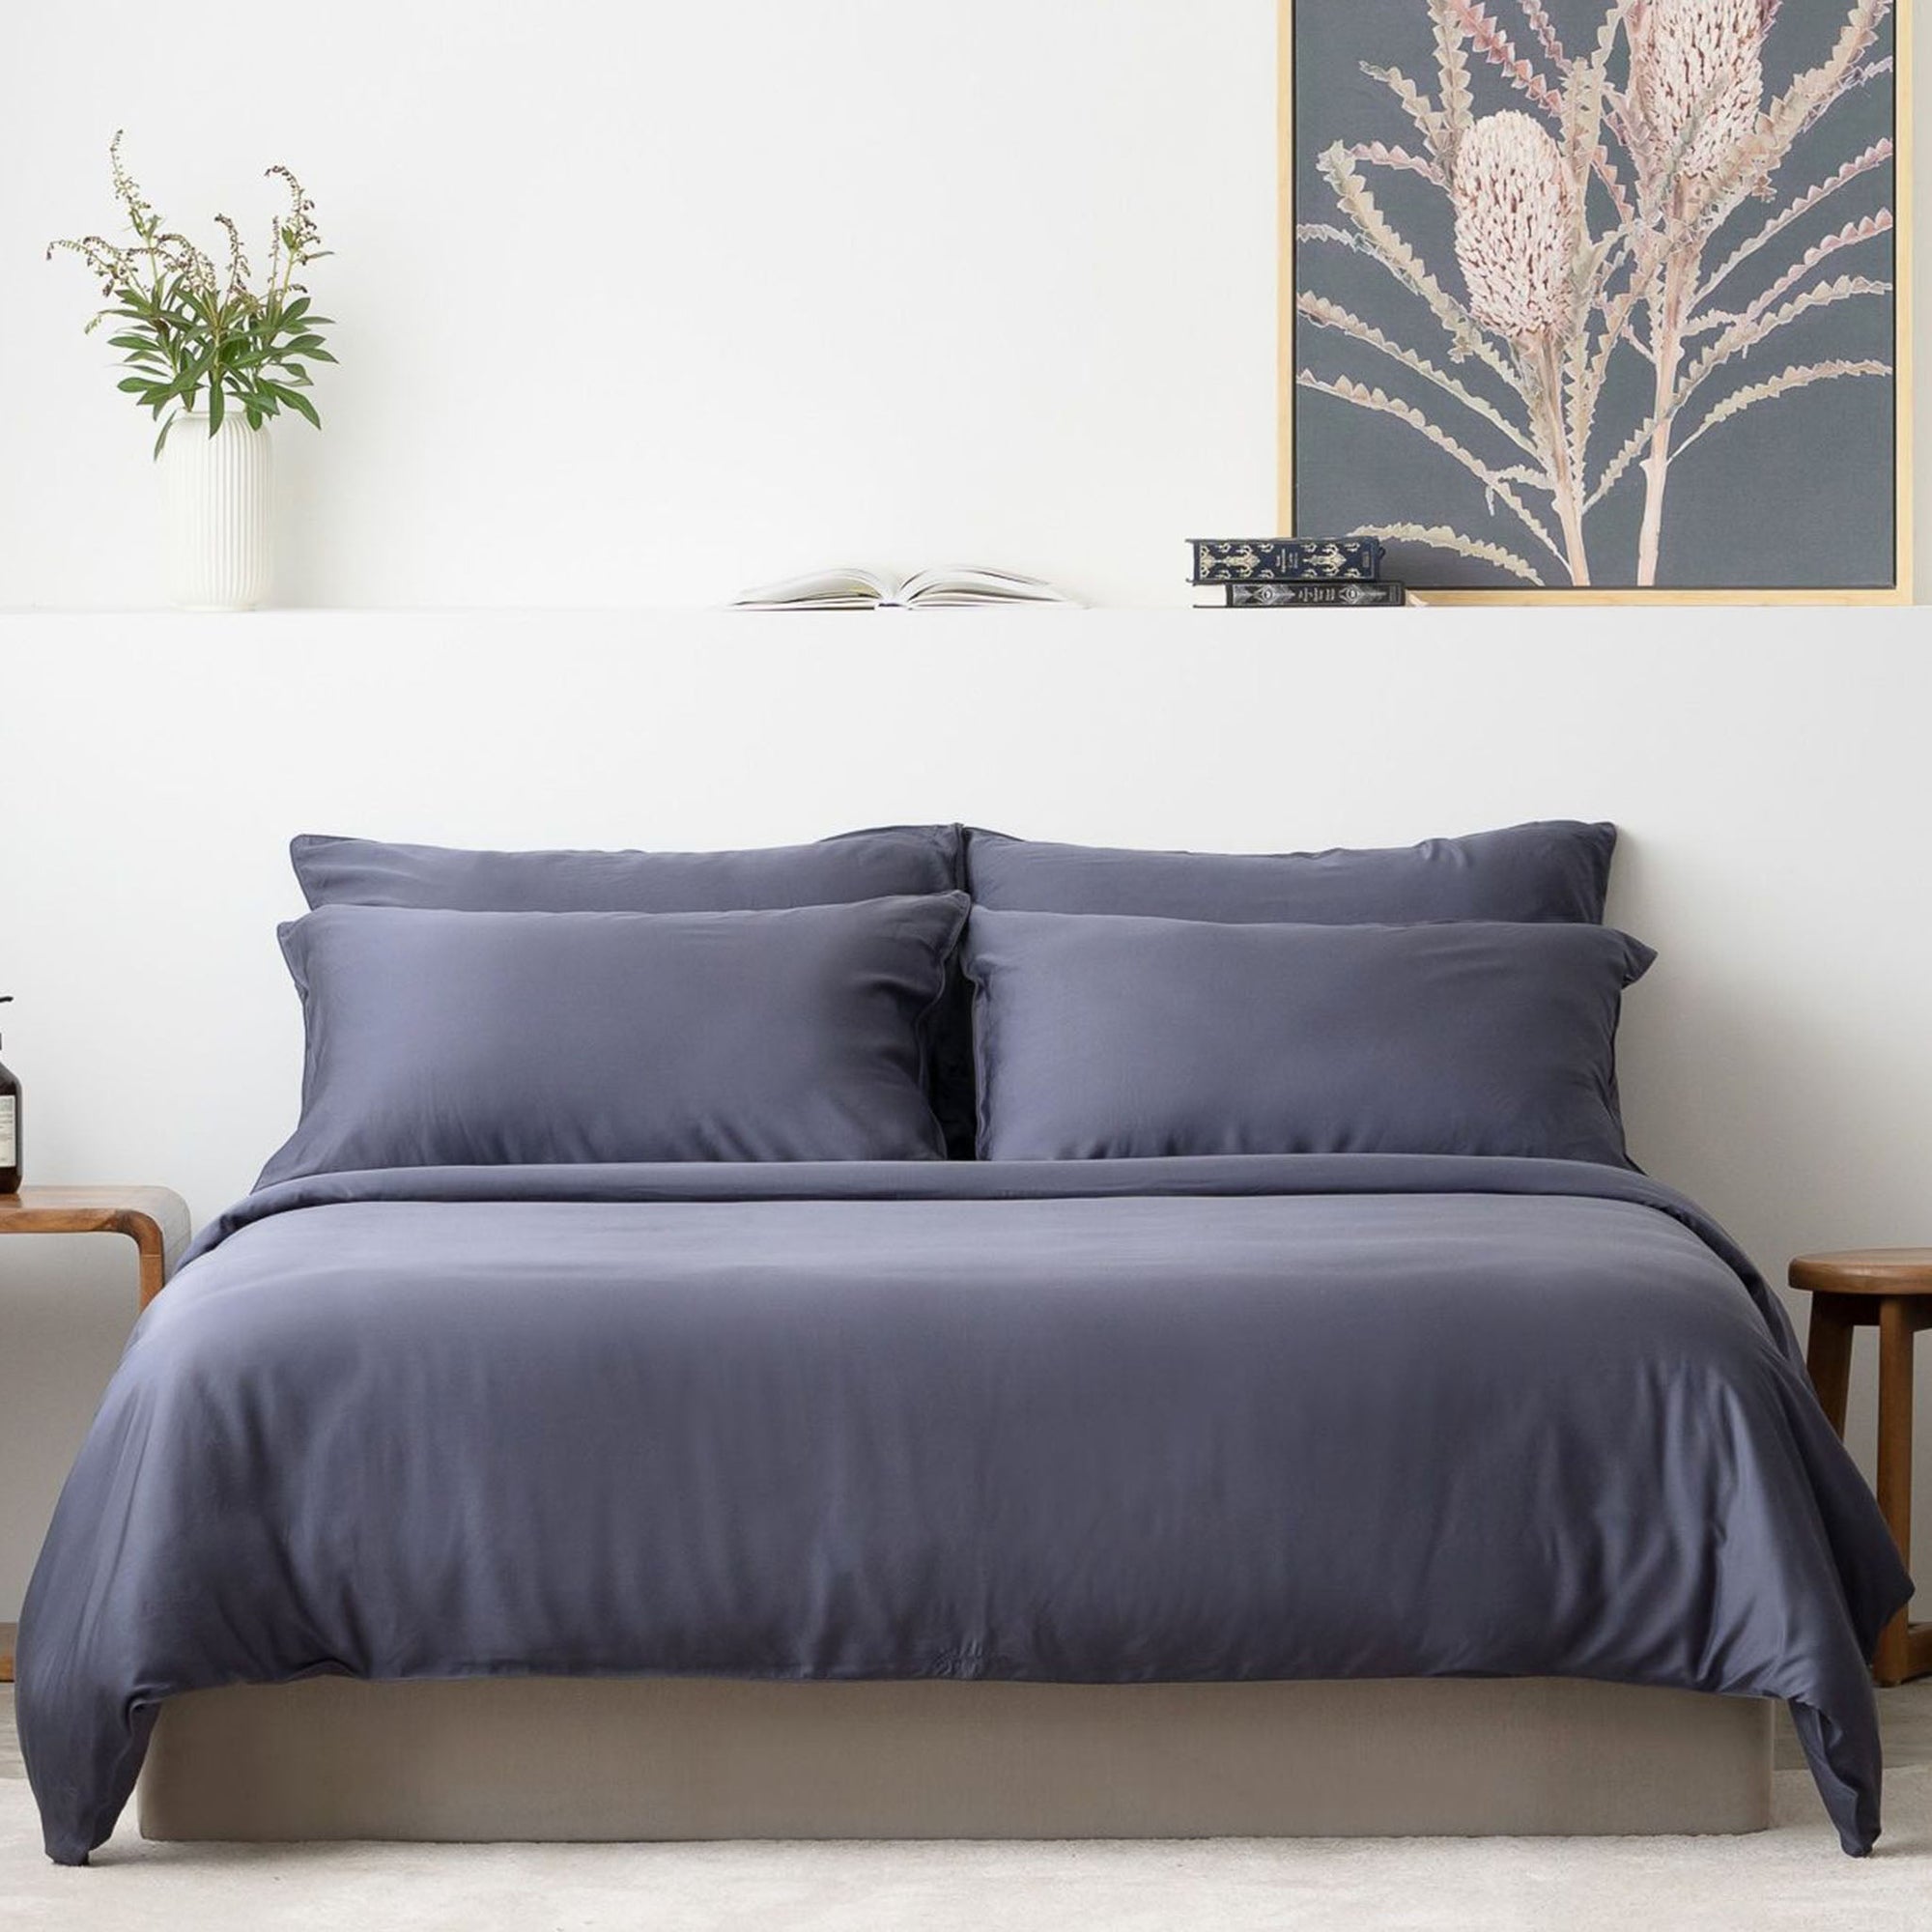 Midnight Blue TENCEL Bed Sheets Classic Set with Tencel Fitted Sheet, Tencel Pillow Case, Tencel Duvet Cover. Buy Midnight Blue Bed Sheets at Weavve Home, Best Bed Sheets Singapore and Luxury Hotel Sheets. 400 High Thread Count Bed Sheet. 